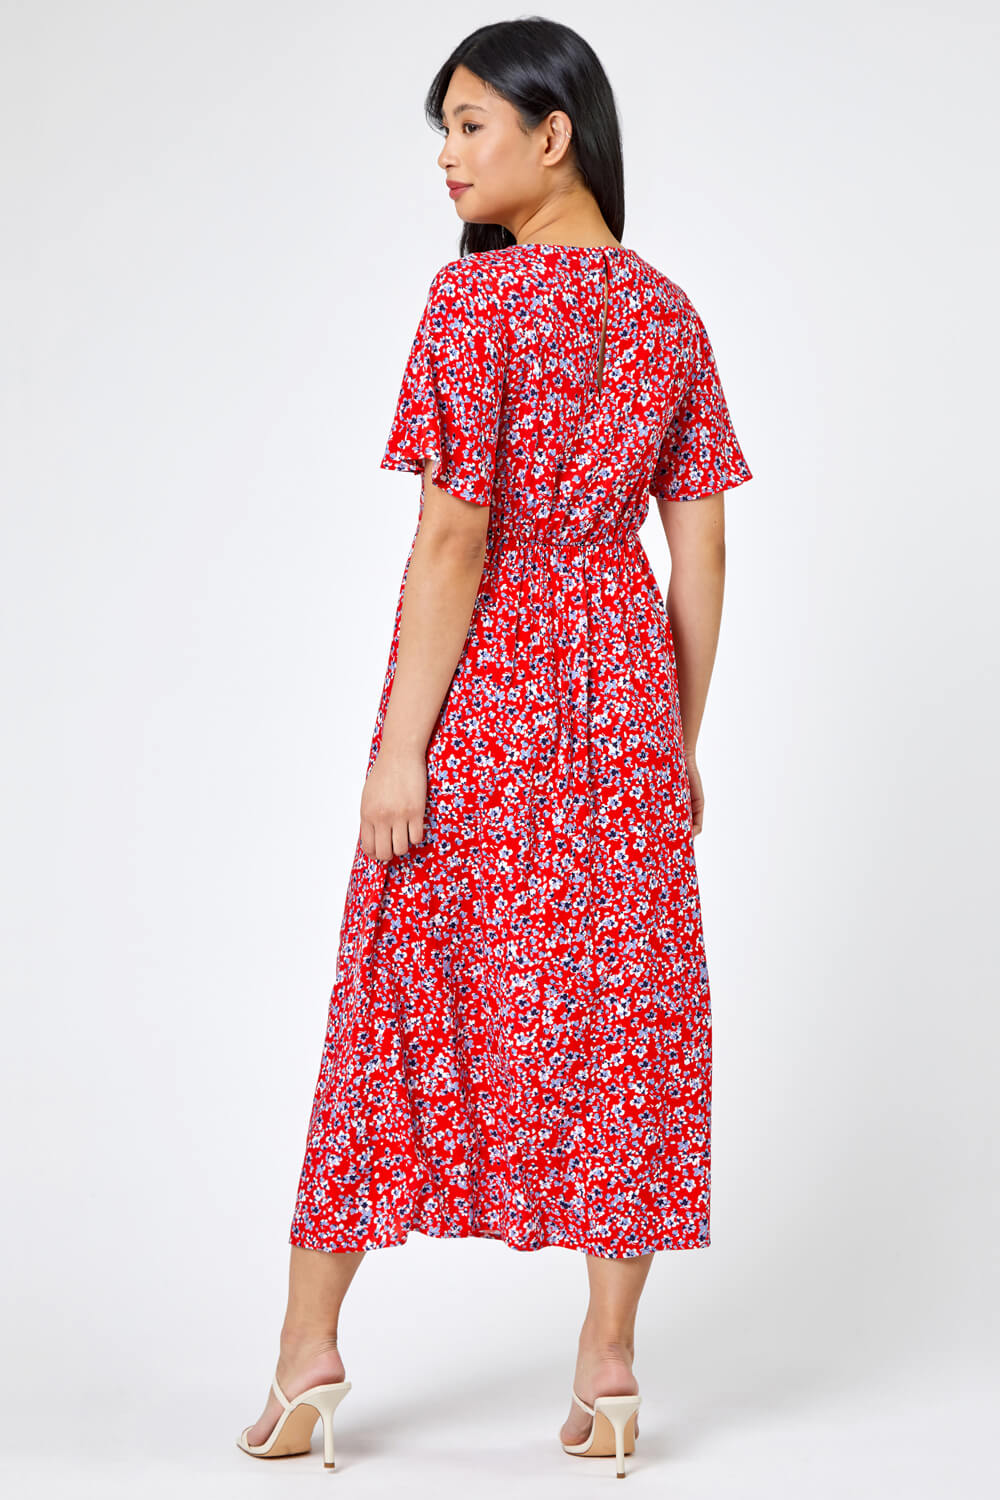 Red Petite Floral Print Flute Sleeve Dress, Image 2 of 5